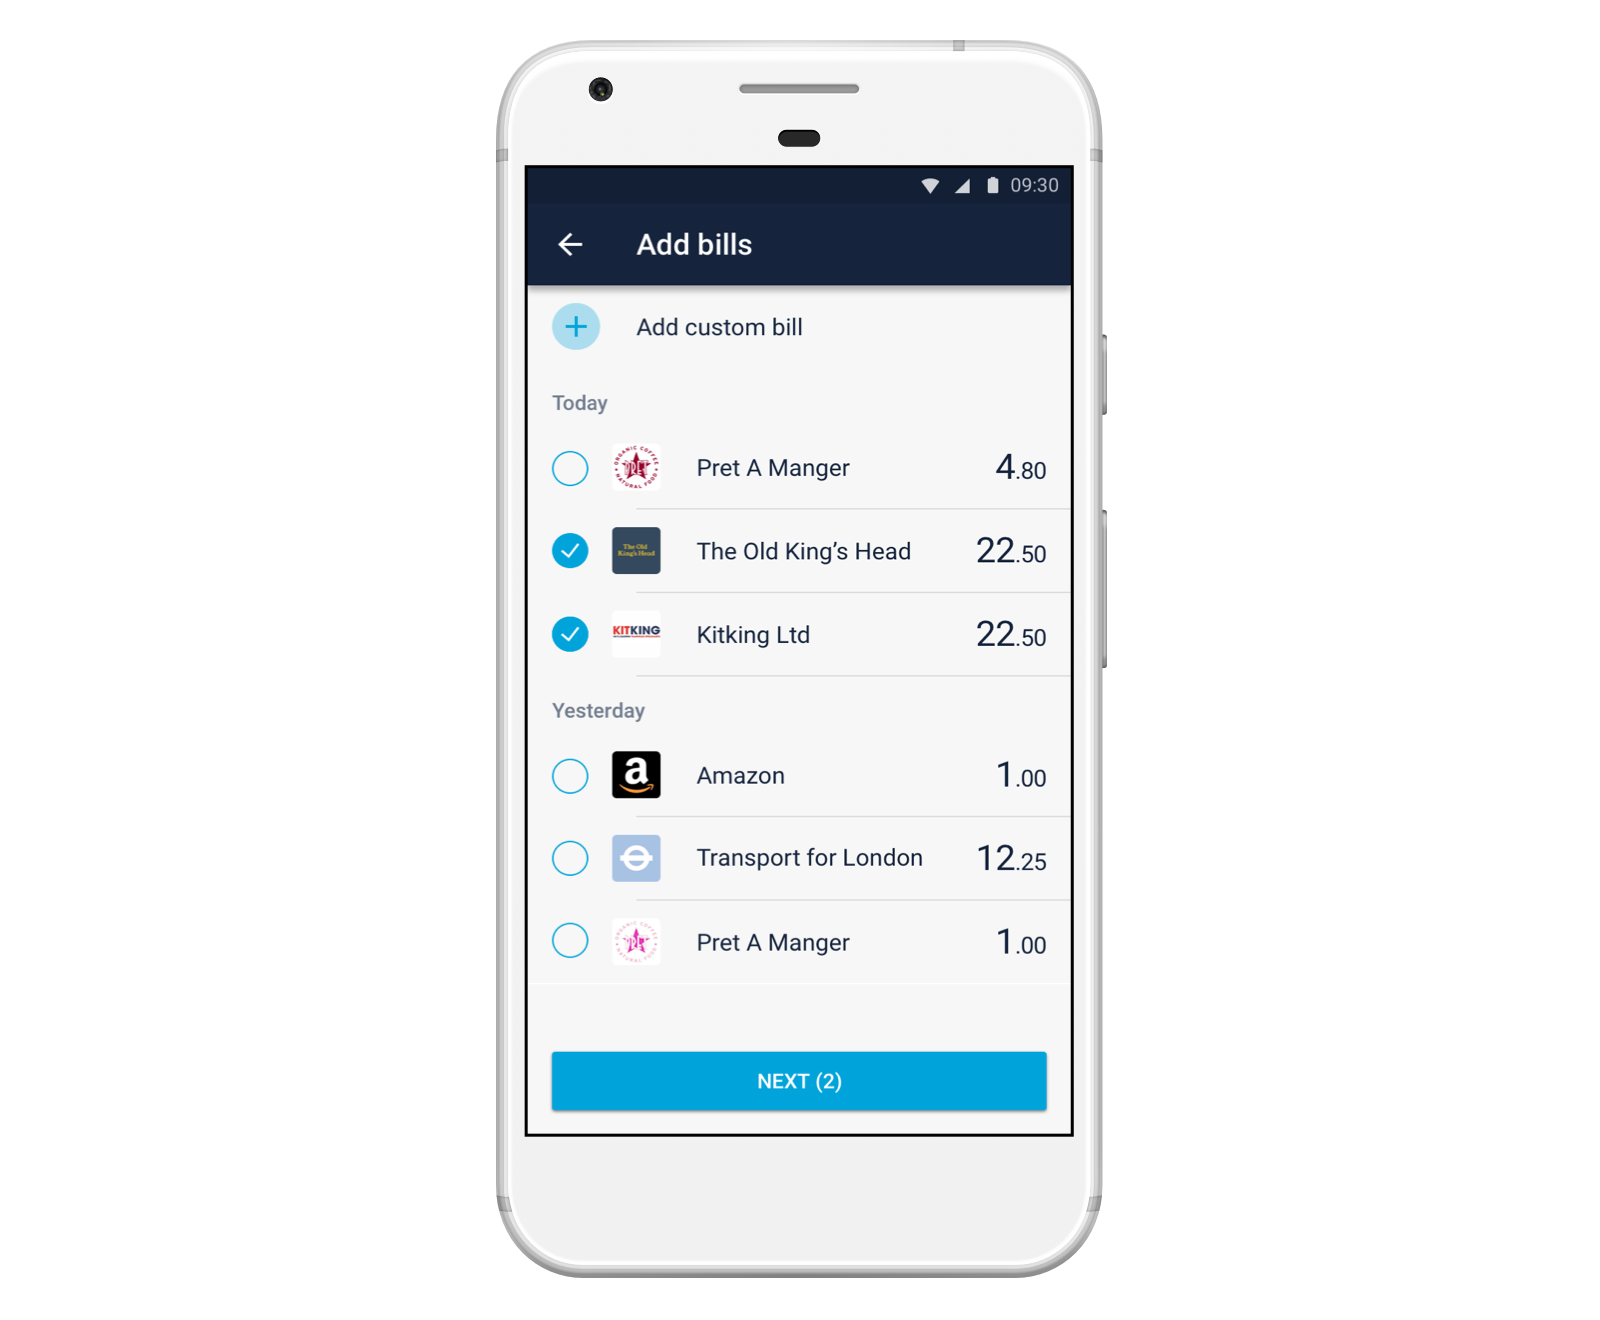 Image of a smartphone showing a Shared Tab on the Monzo app